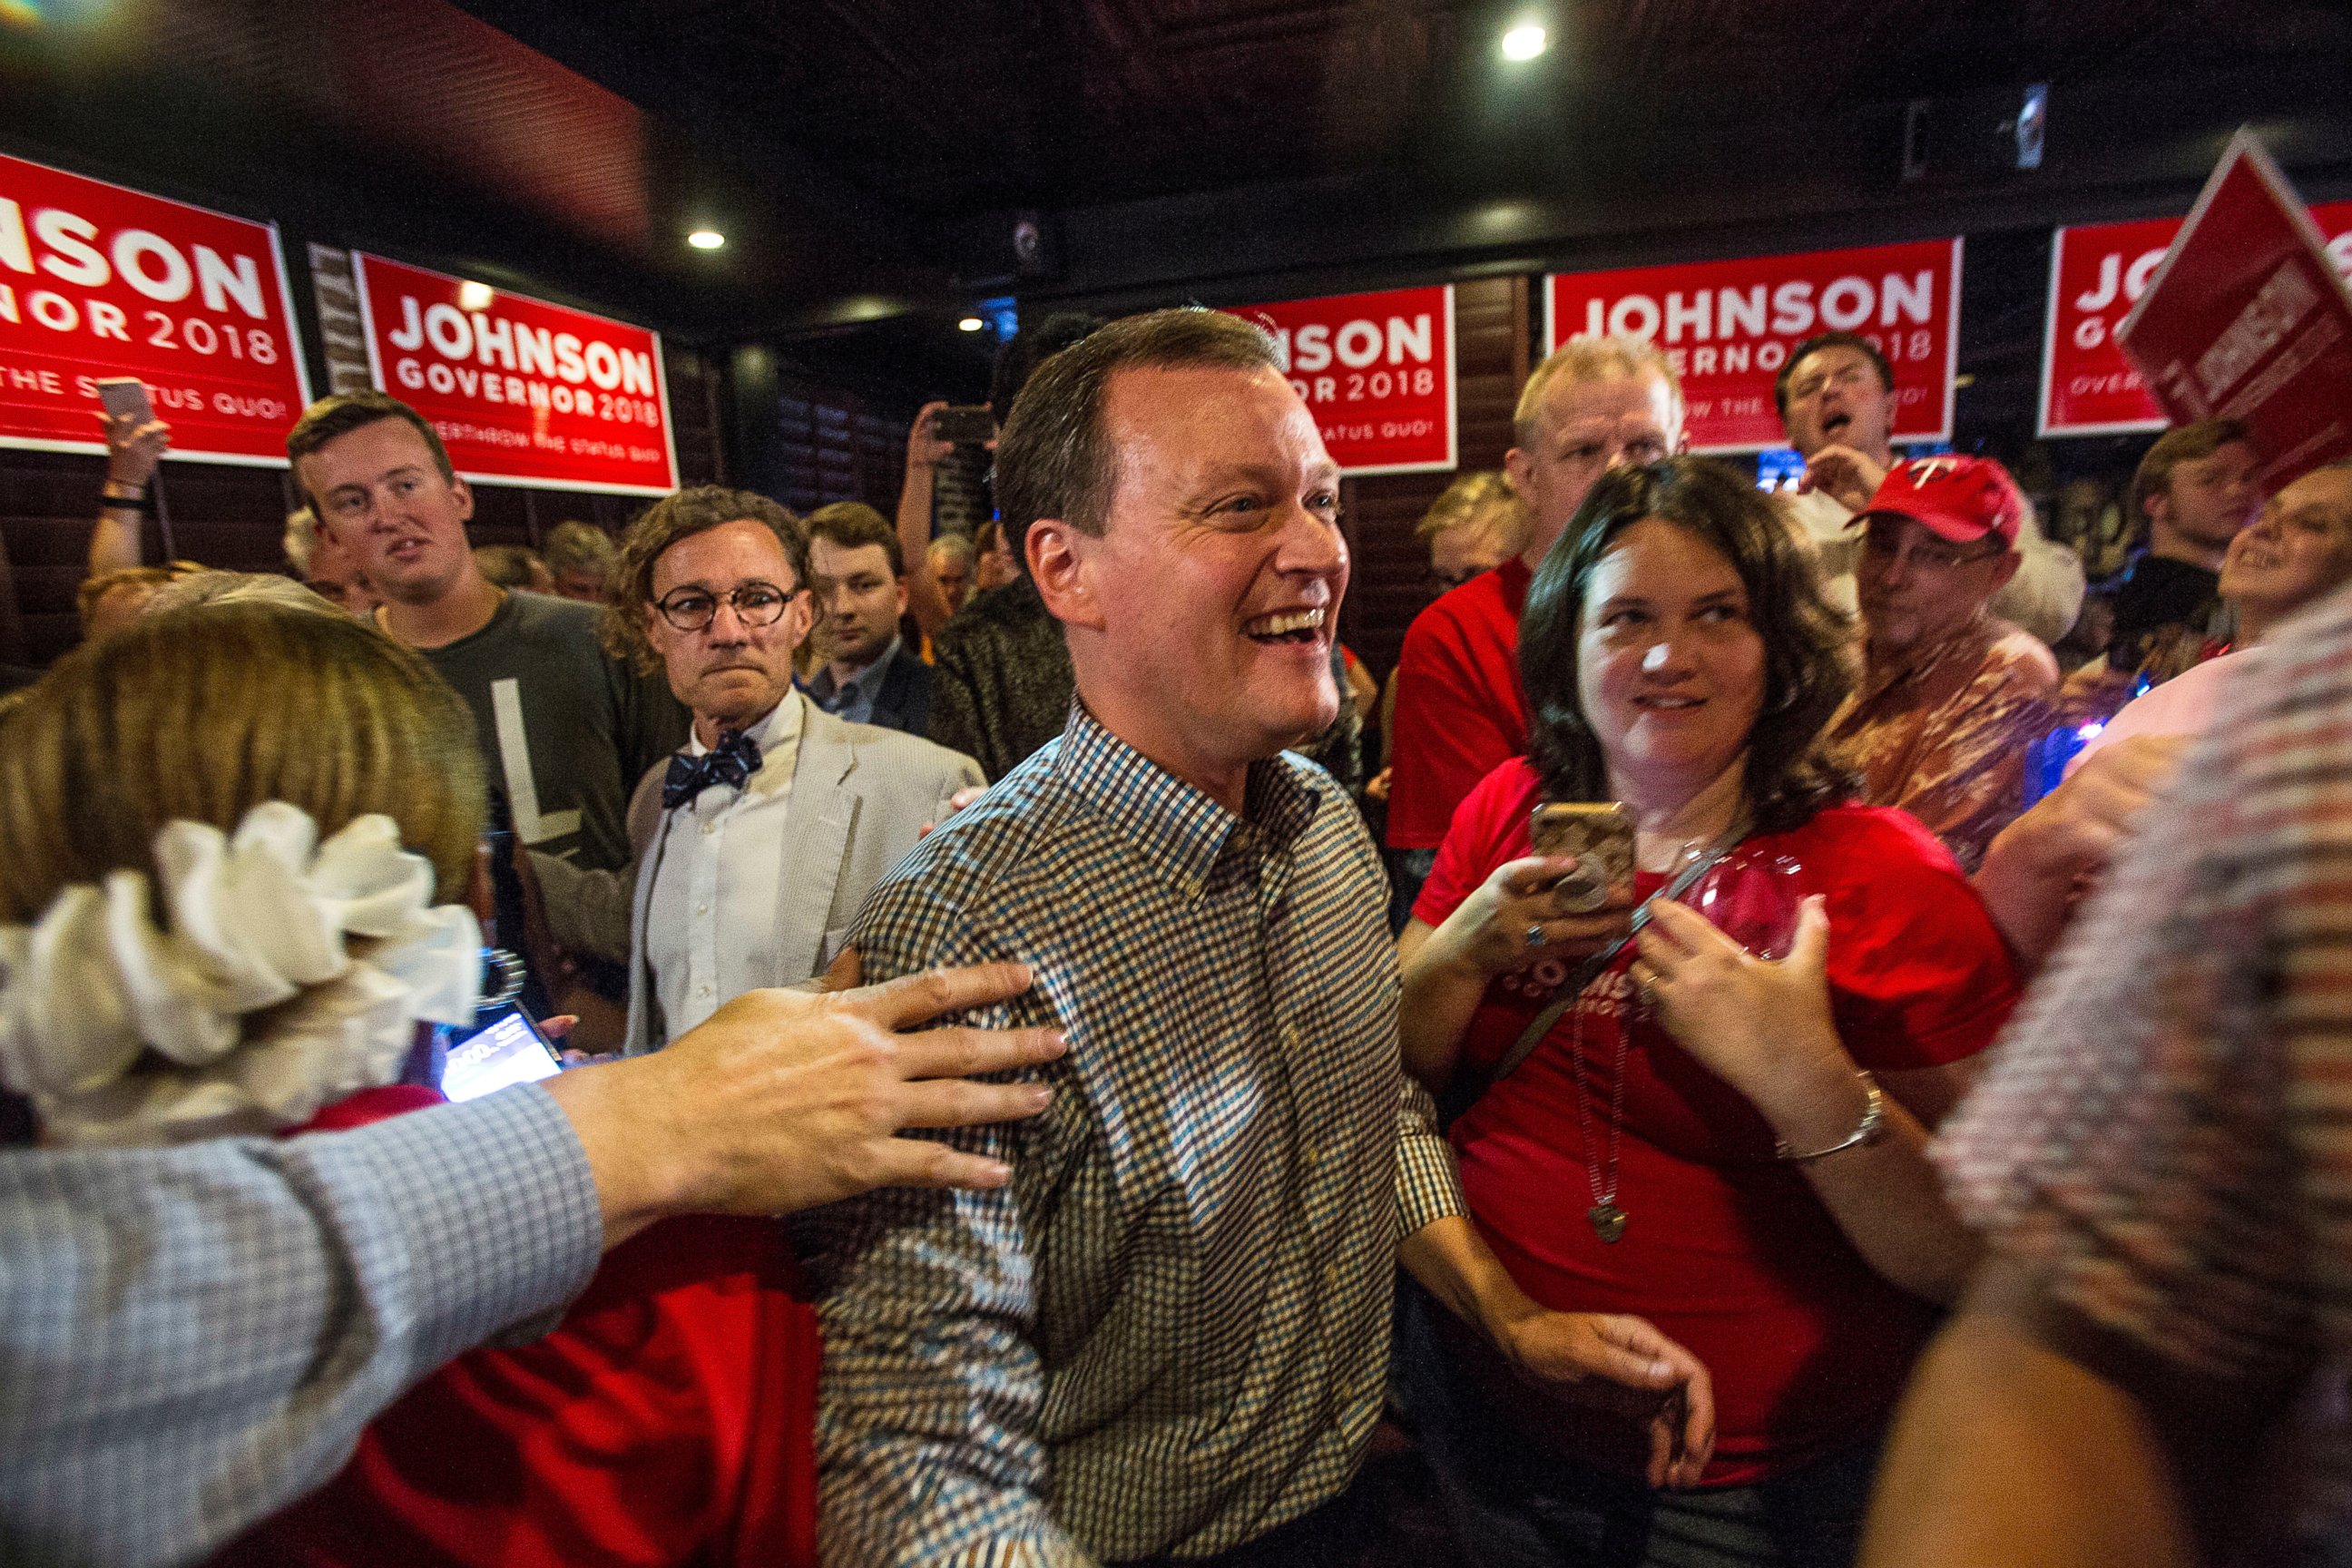 Minnesota gubernatorial candidate Jeff Johnson, center, is greeted by his supporters after returning to the watch party, Tuesday, Aug. 14, 2018, in Plymouth, Minn.